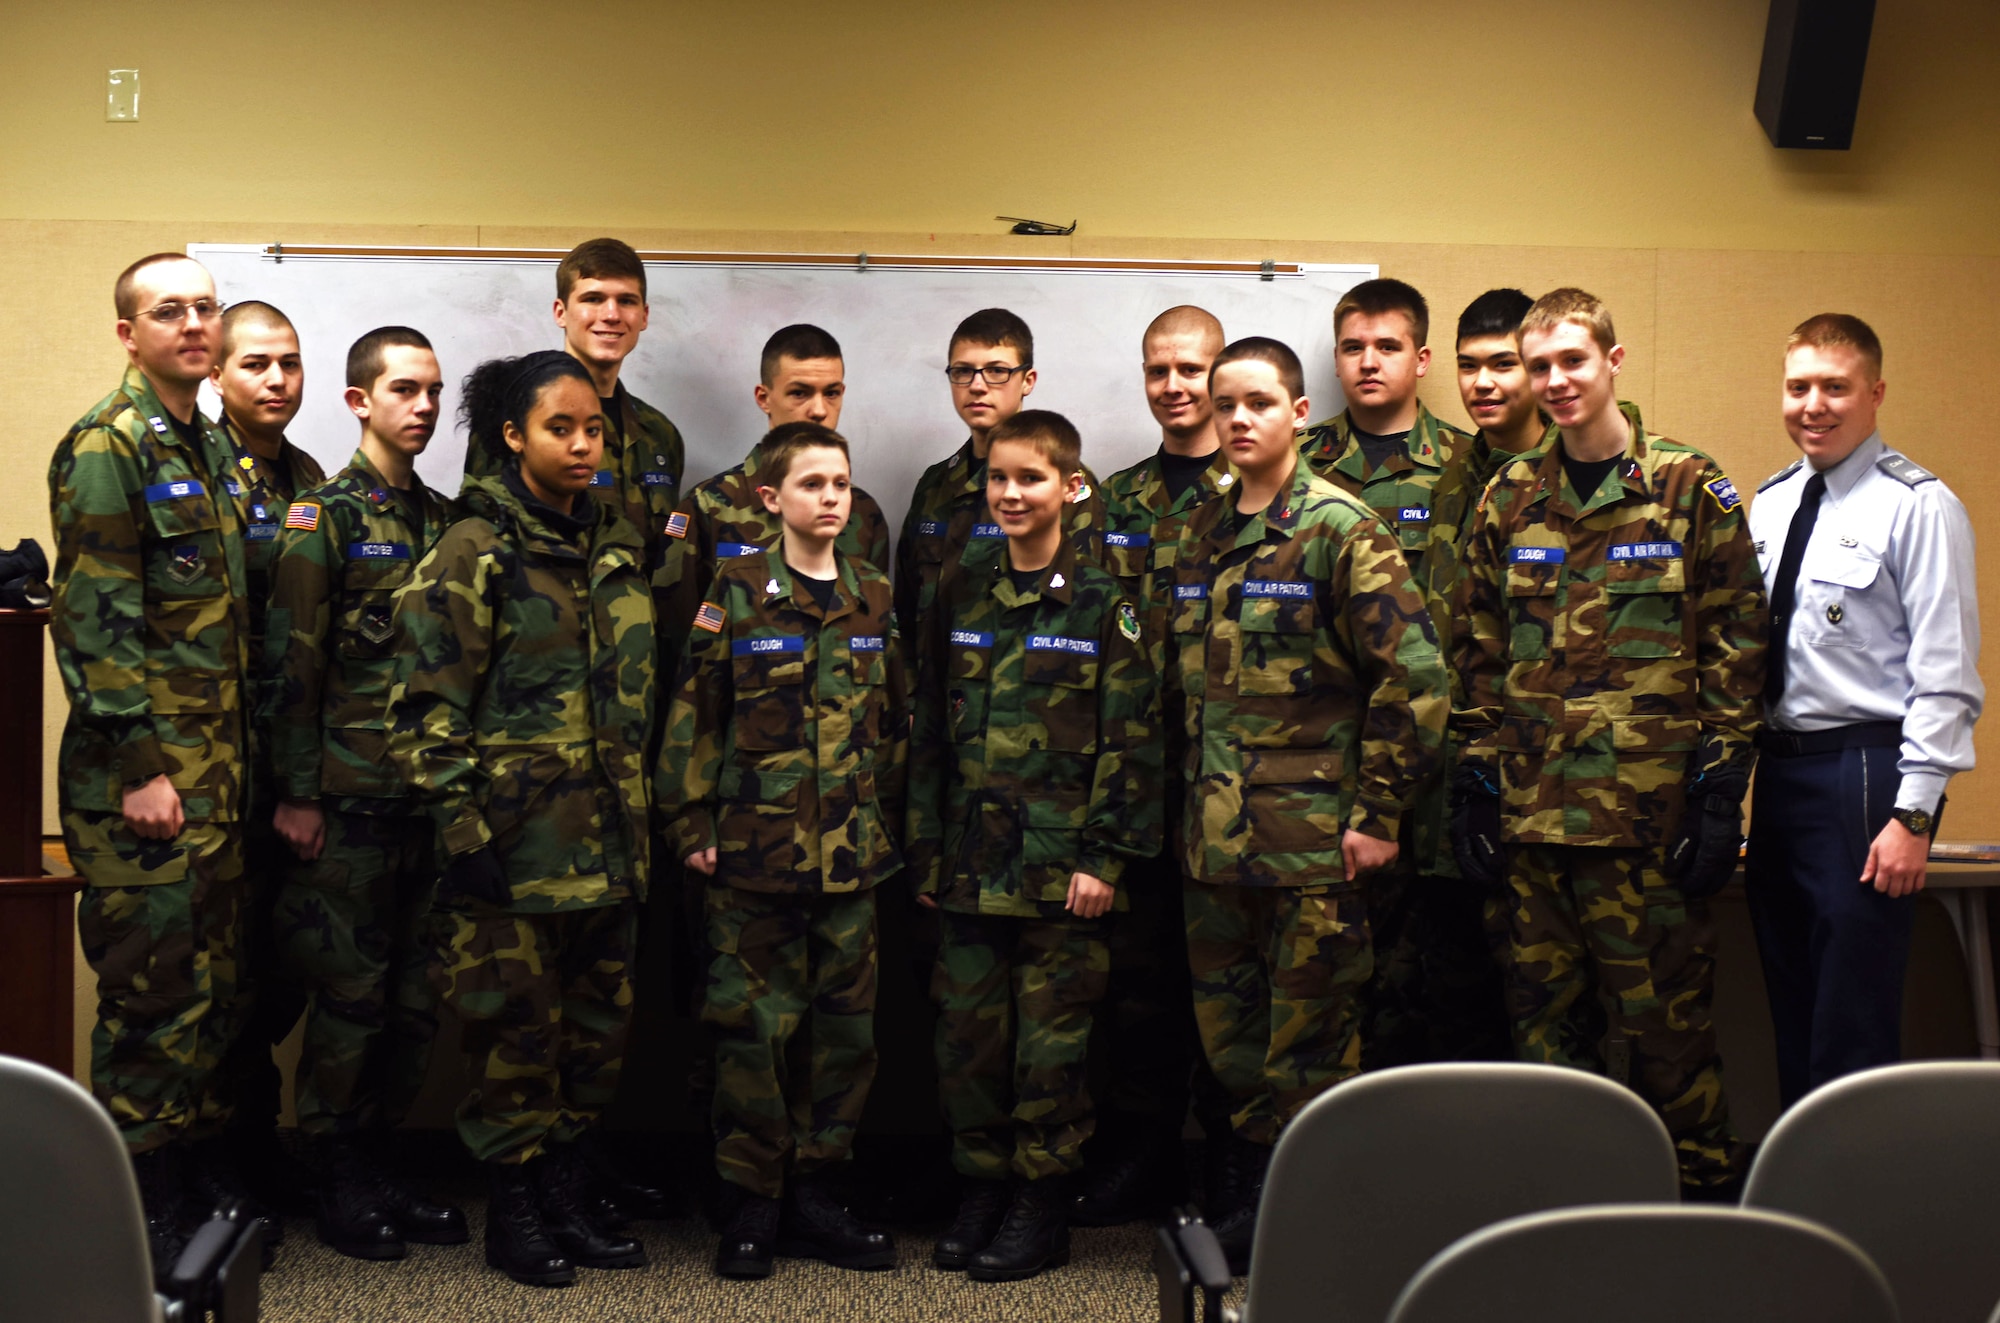 Members of the Civil Air Patrol Malmstrom Composite Squadron pose for a photograph after a pre-flight brief at the Malmstrom Air Force Base 40th Helicopter Squadron building Jan. 23, 2016. After the meeting, members of the CAP squadron had the opportunity to ride in a helicopter for an orientation flight. (U.S. Air Force photo/Airman Collin Schmidt) 